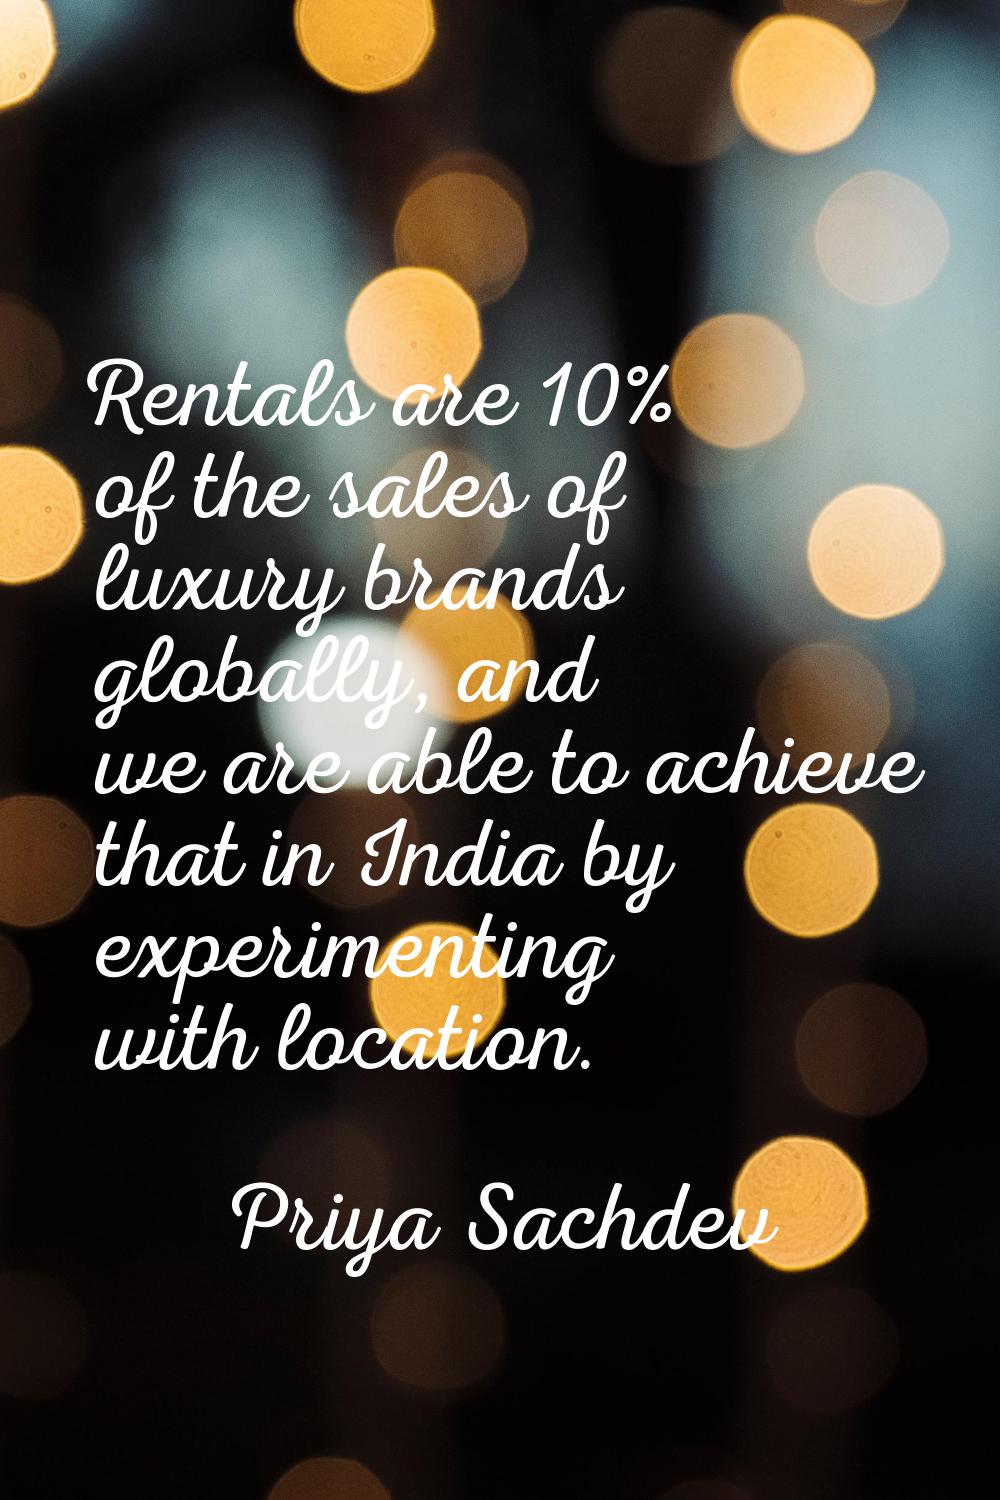 Rentals are 10% of the sales of luxury brands globally, and we are able to achieve that in India by